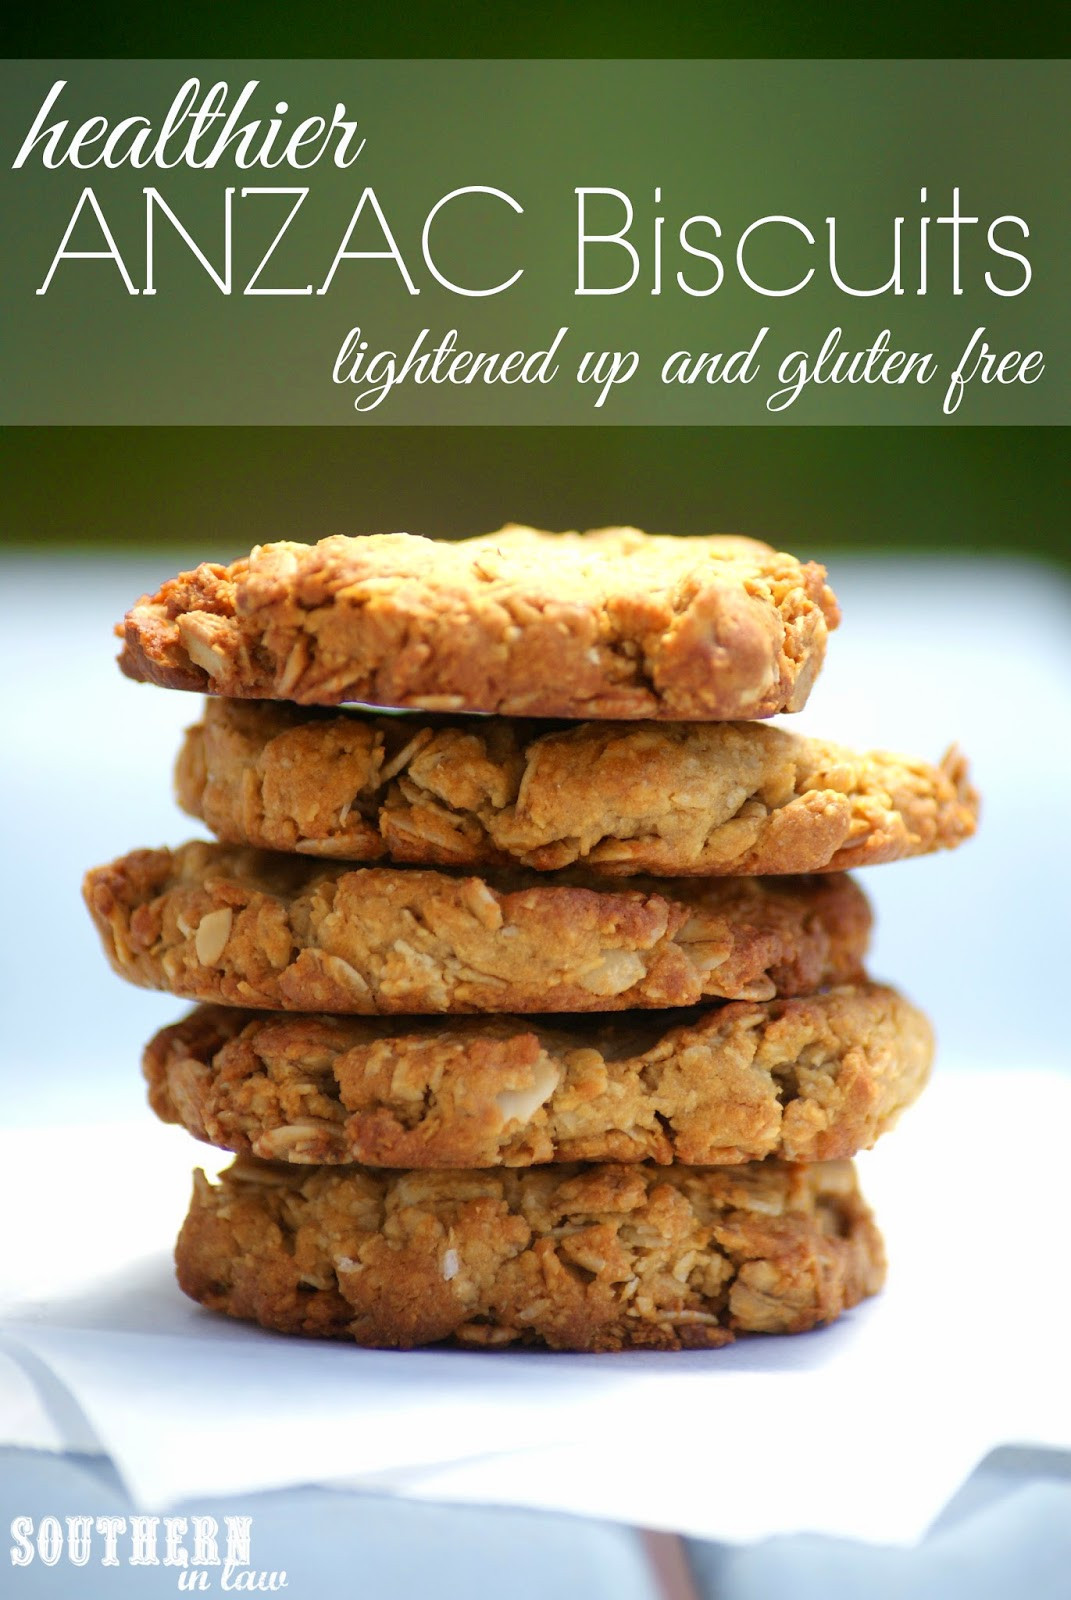 Healthy Biscuit Recipe
 Southern In Law Recipe Healthier ANZAC Biscuits